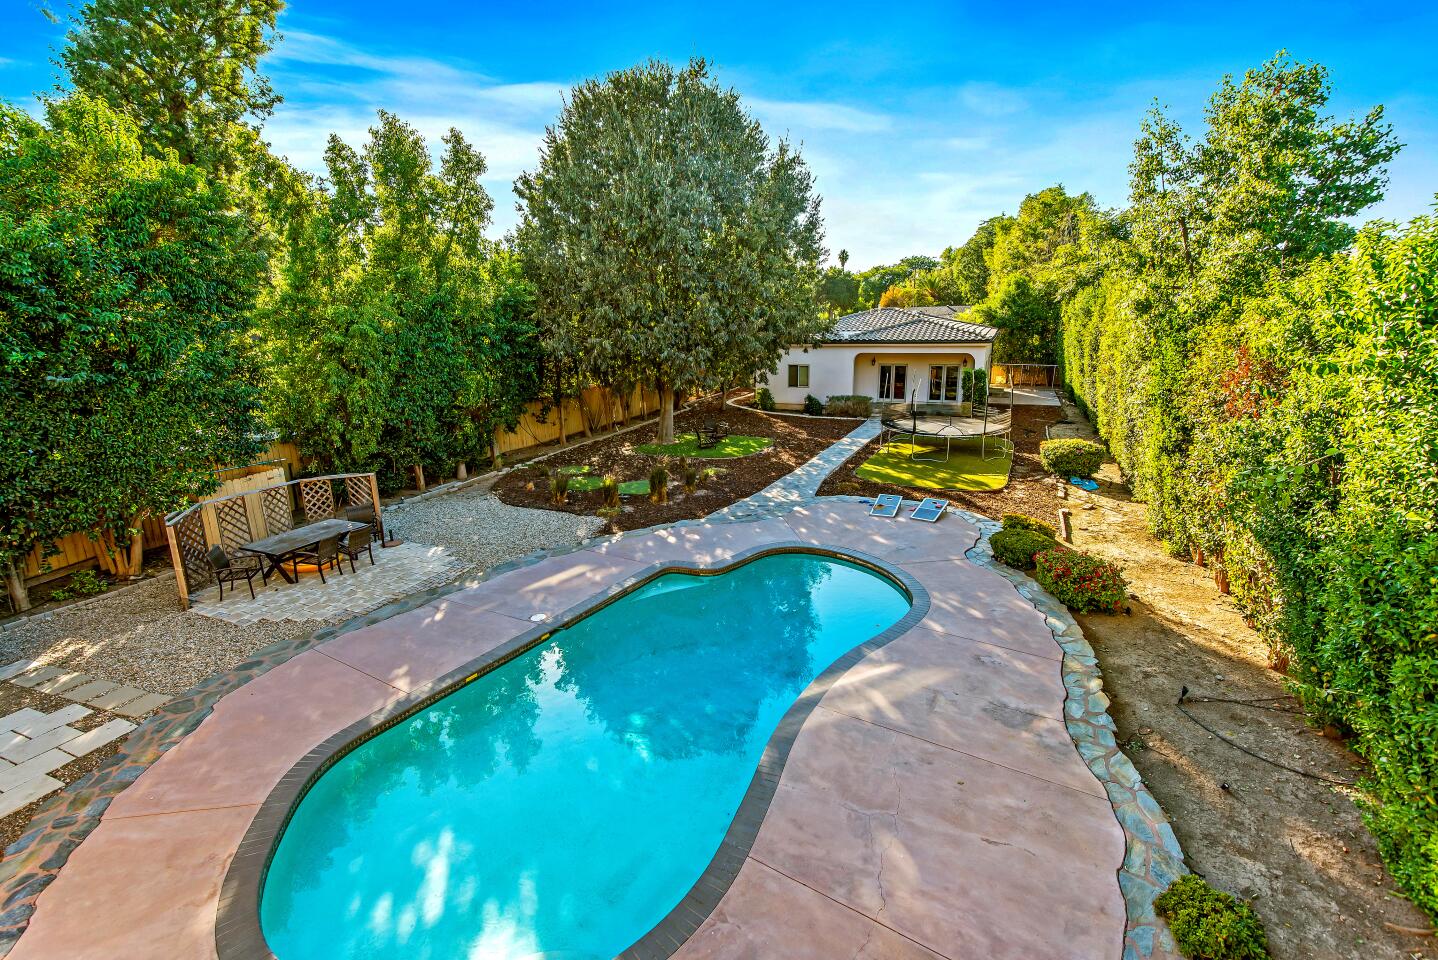 Derek Fisher's half-acre spread includes a Mediterranean-style home, a swimming pool and a guesthouse at the far end of the property.